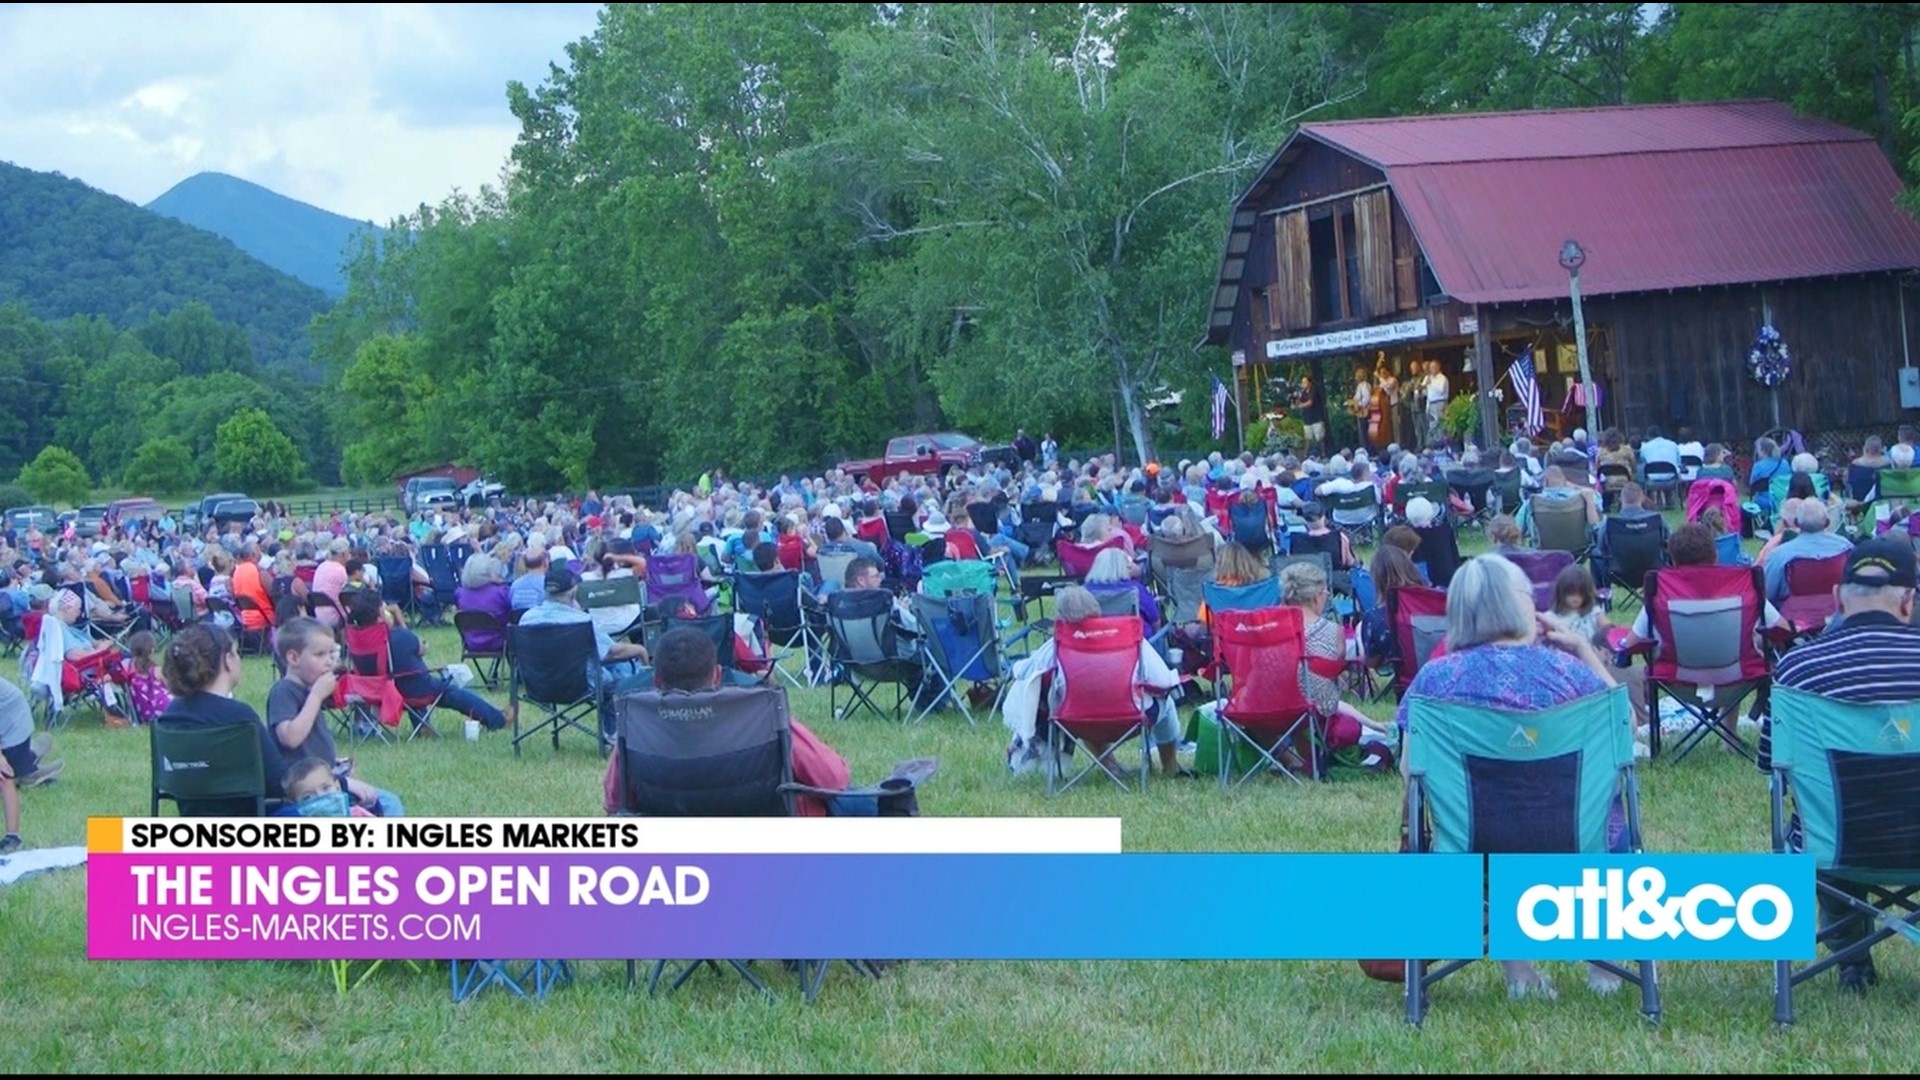 The Singing in Hominy Valley returns to Candler for traditional gospel music and breathtaking views.